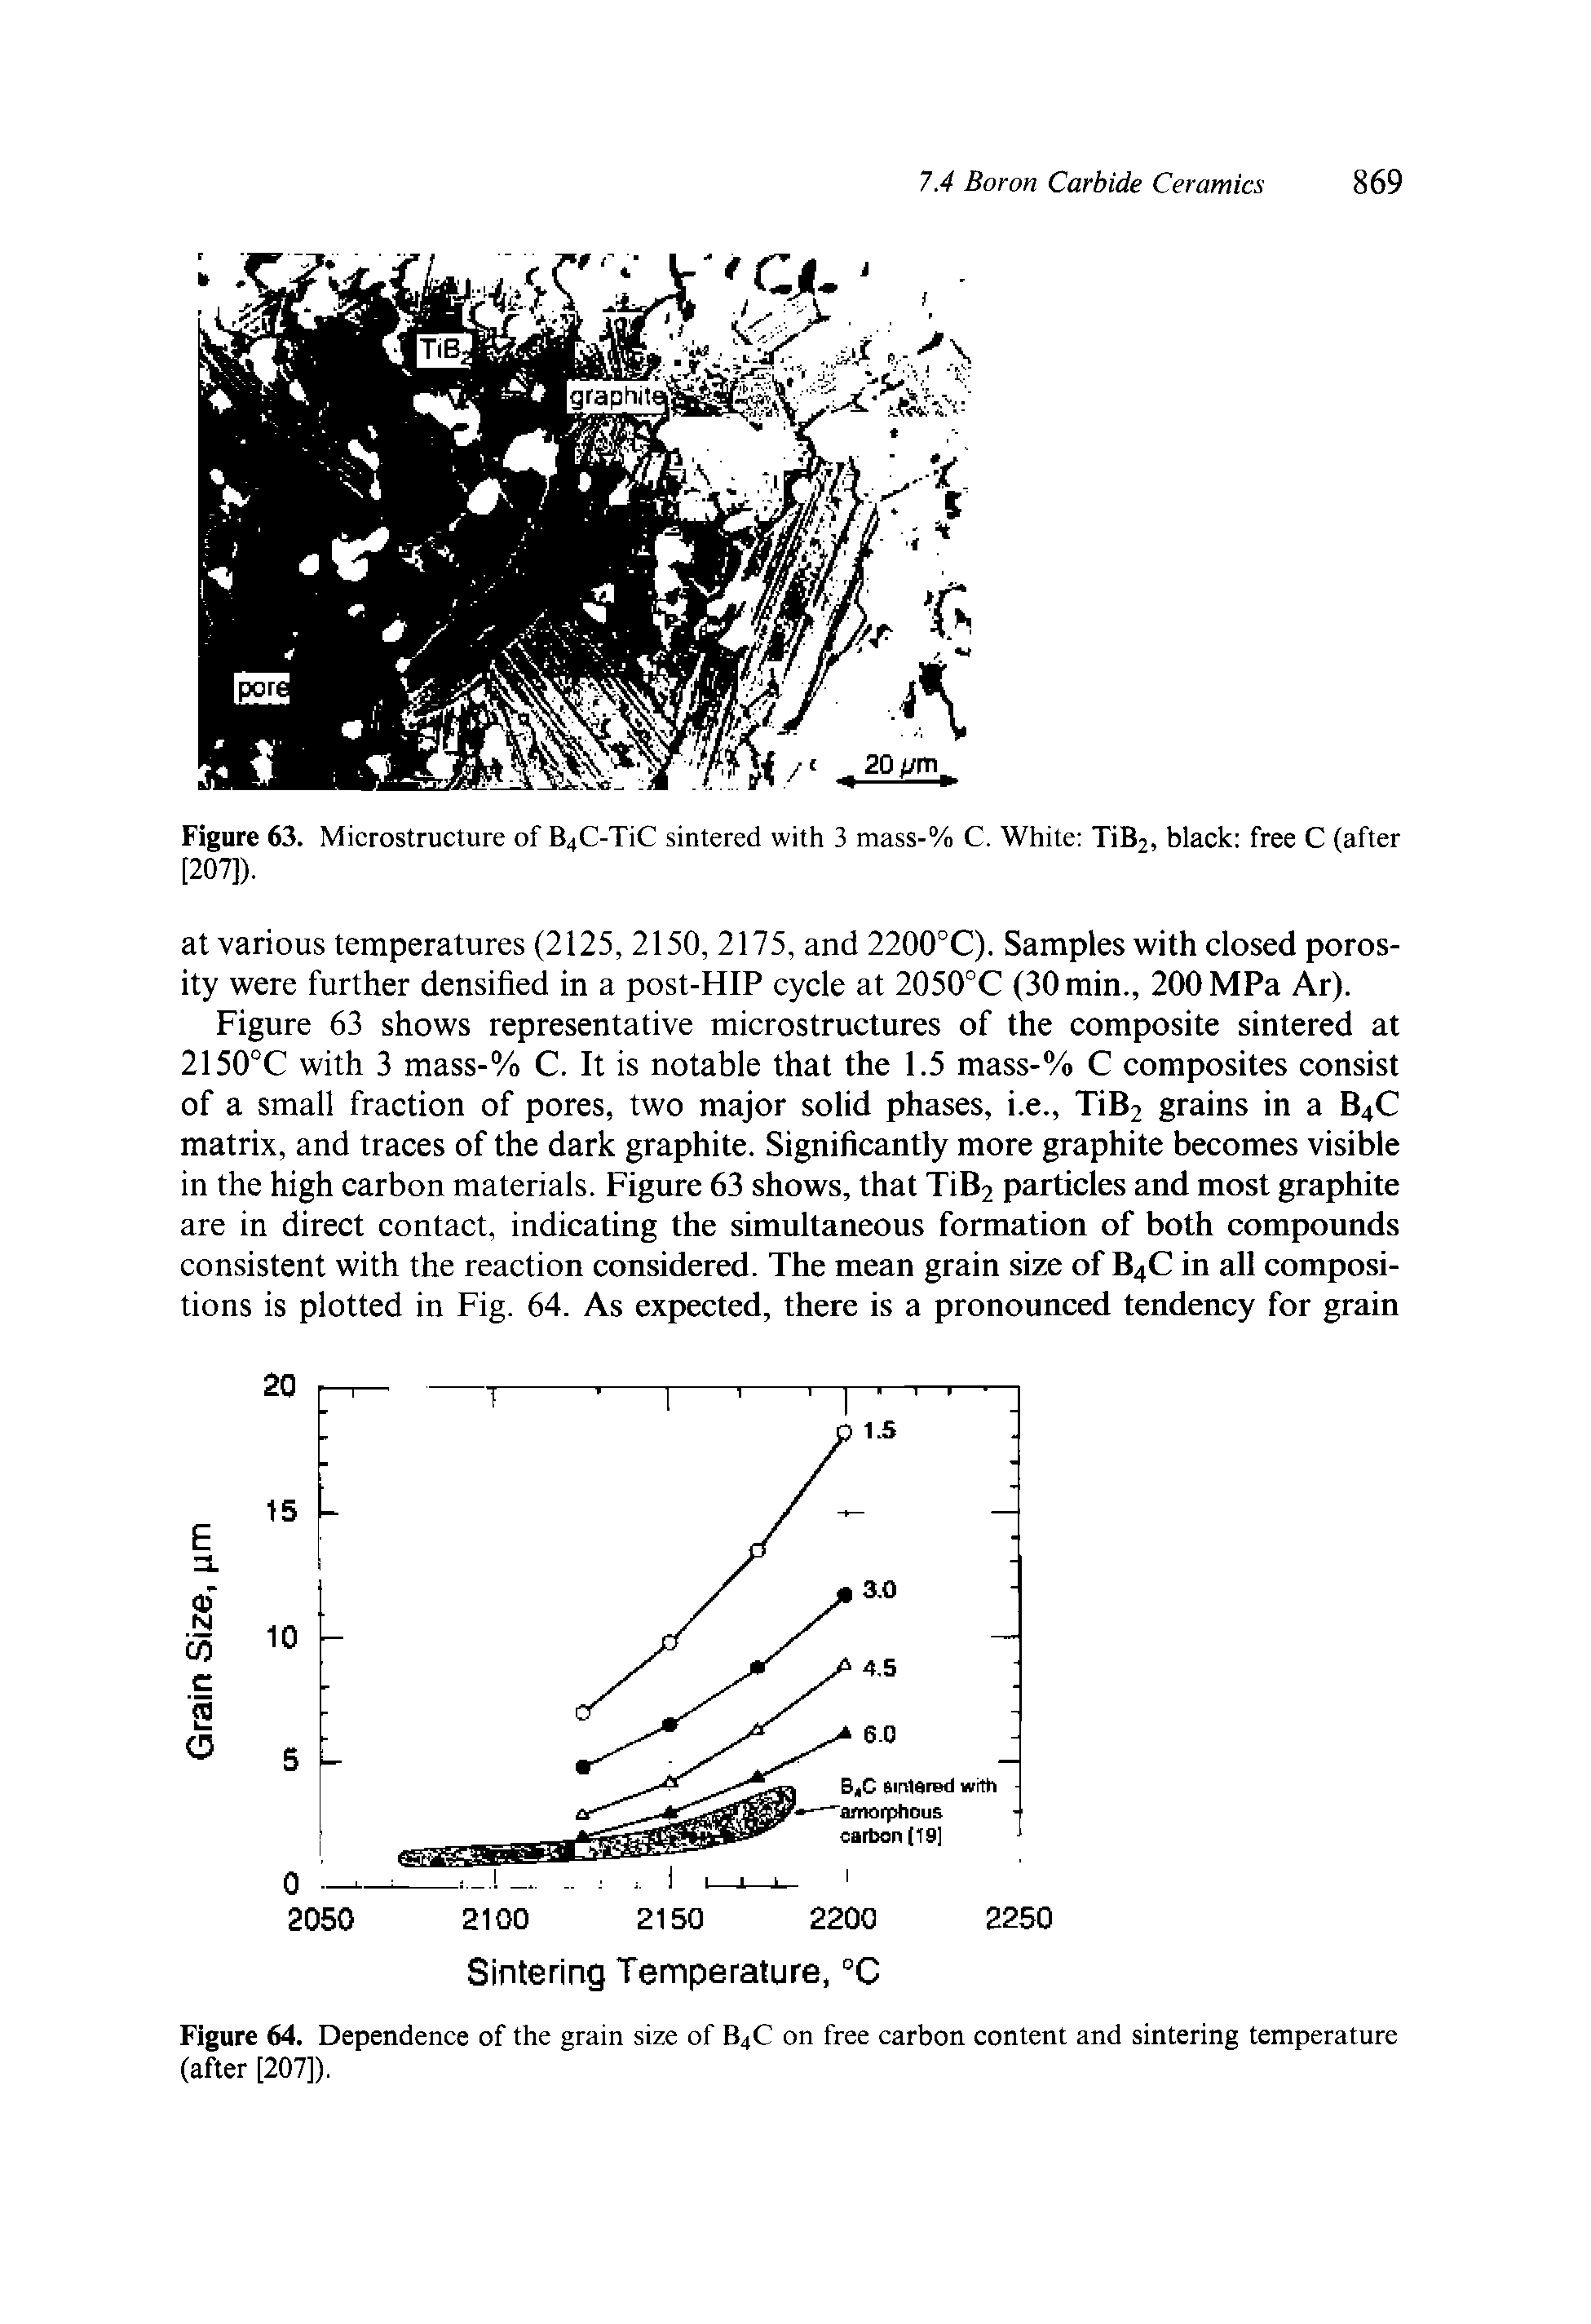 Figure 64. Dependence of the grain size of B4C on free carbon content and sintering temperature (after [207]).